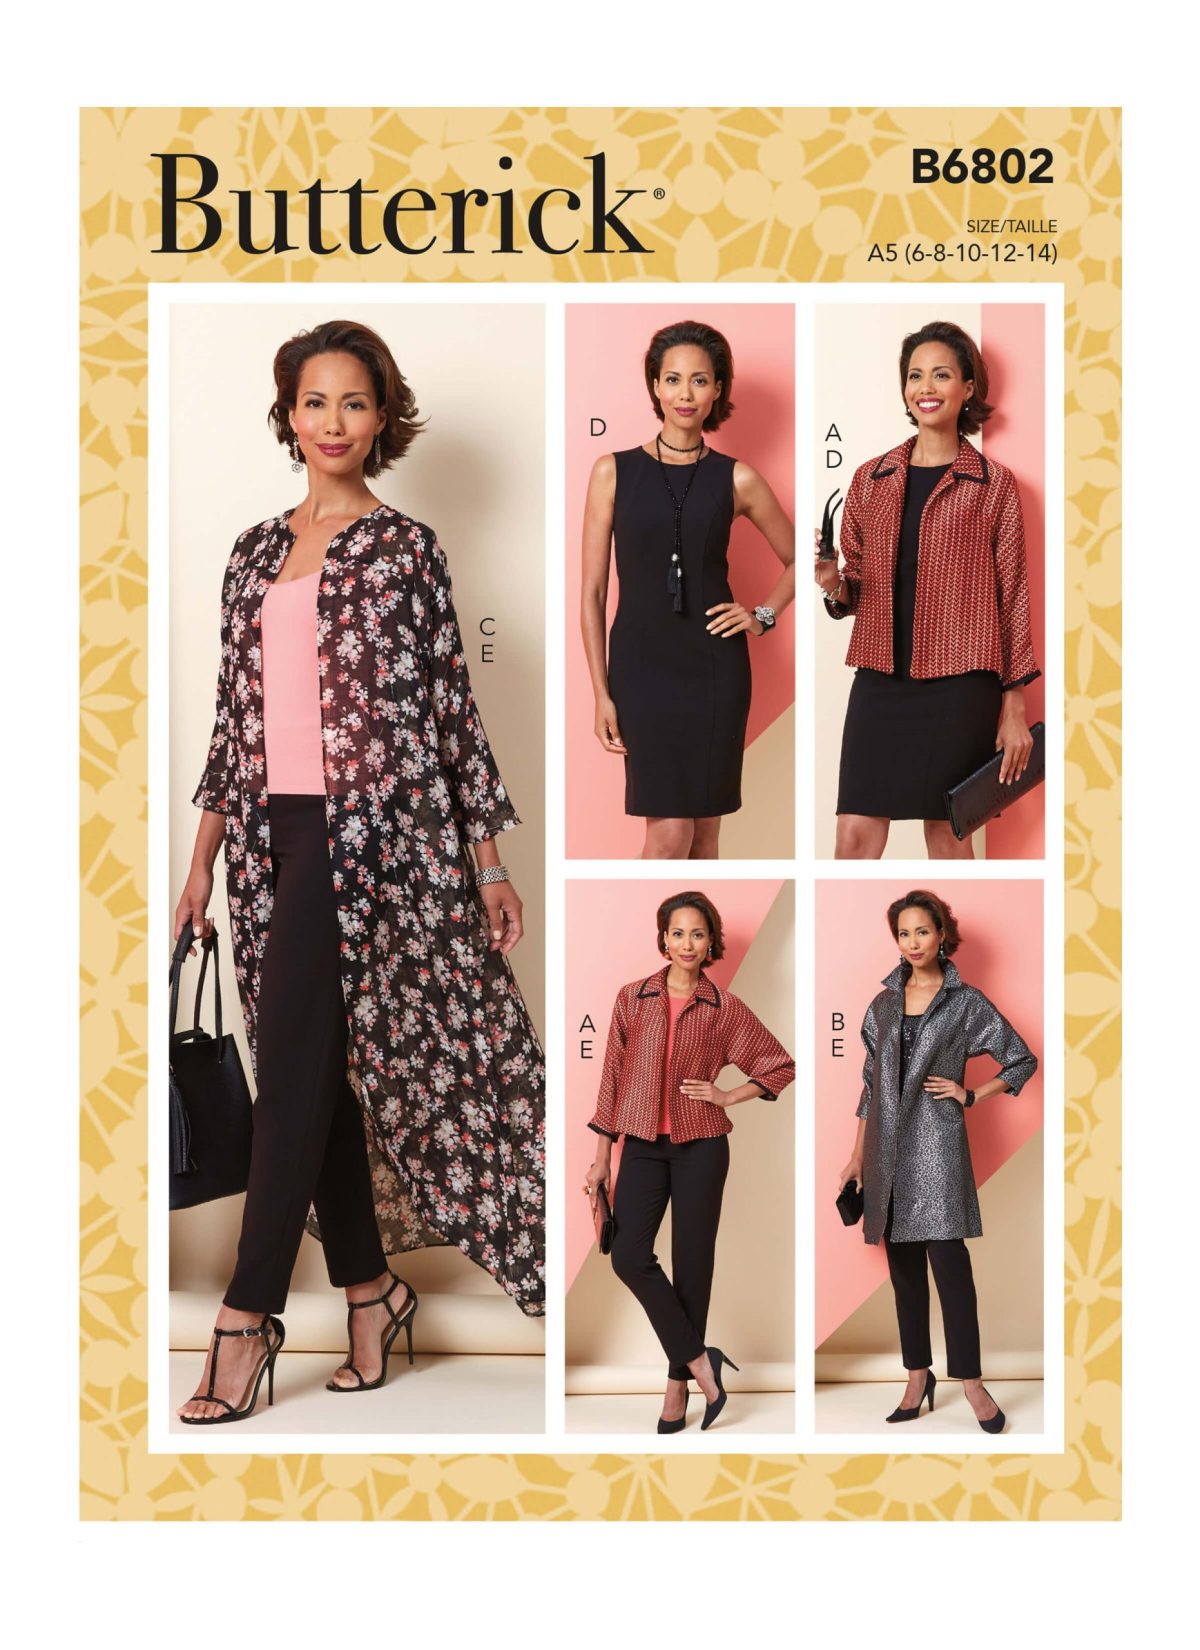 Butterick Sewing Pattern B6802 Misses' Jacket, Dress and Trousers Cordinates